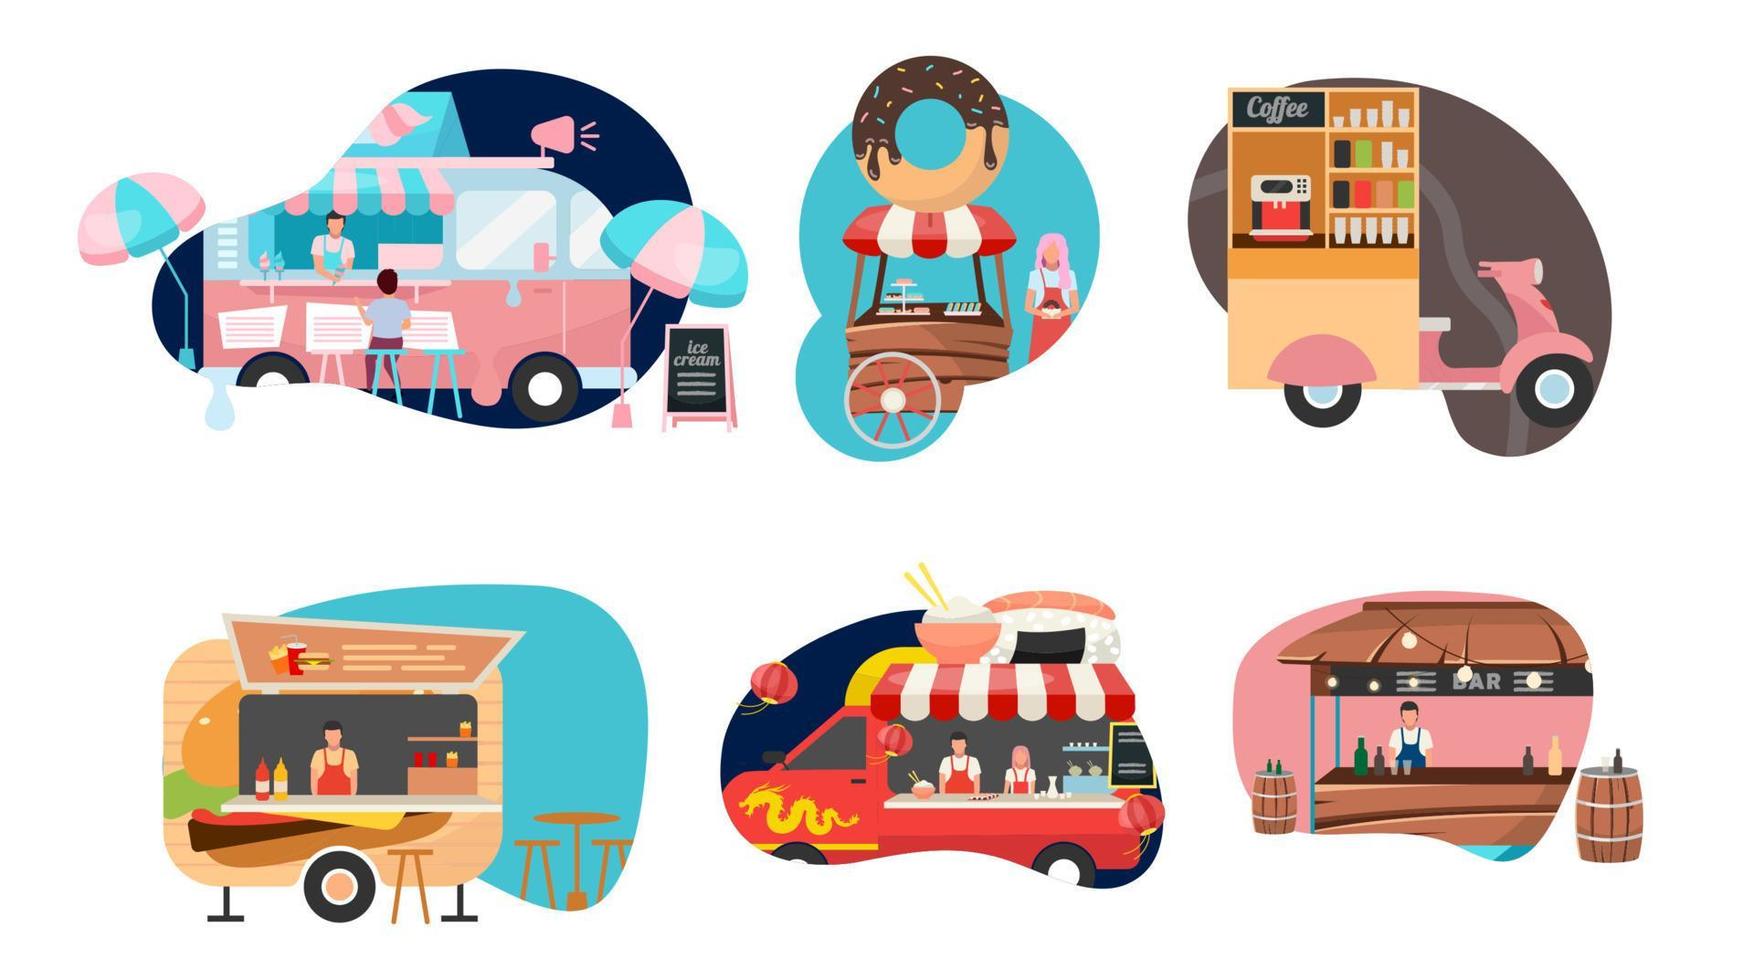 Street food festival flat vector illustrations set. Various kiosks for selling ready takeaway meal. Restaurant, cafe, bar cars. Fairs, street sellers and vehicles isolated cartoon characters